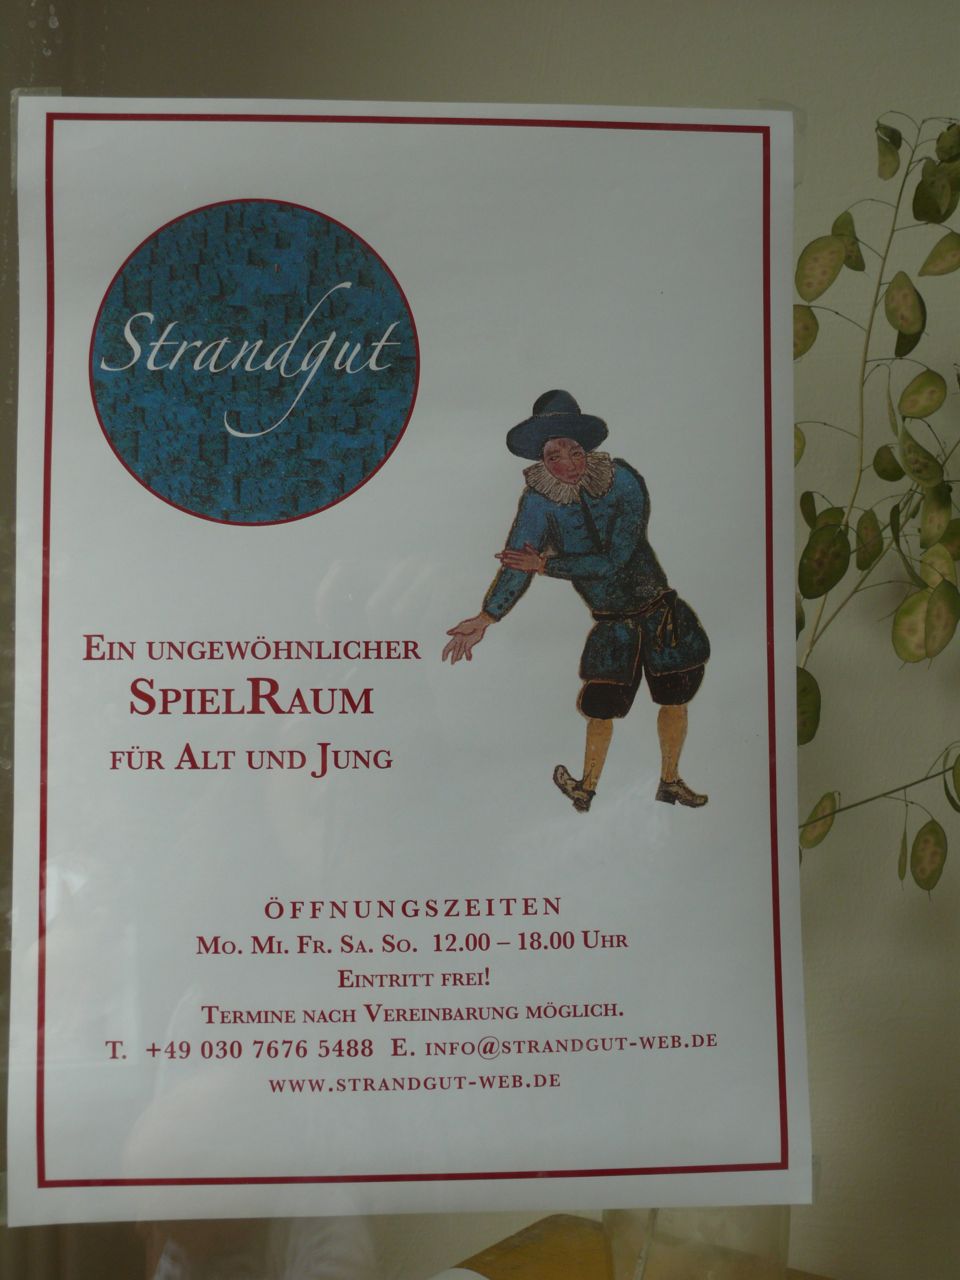 You are currently viewing <!--:en-->Strandgut, a place to be a child<!--:--><!--:it-->Strandgut, a place to be a child<!--:-->